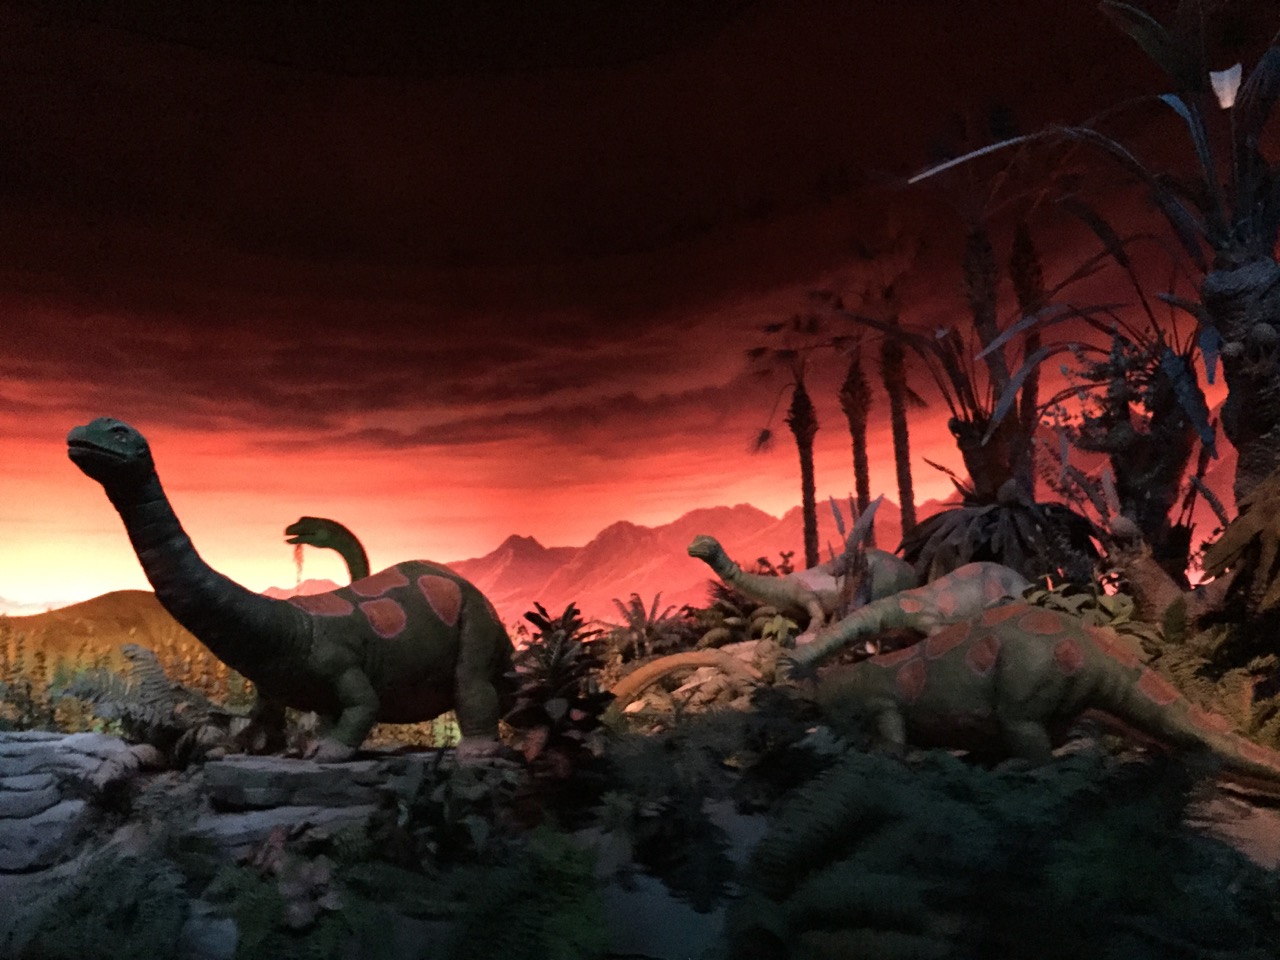 Universe-of-Energy-Dinosaurs-at-Epcot.jpg